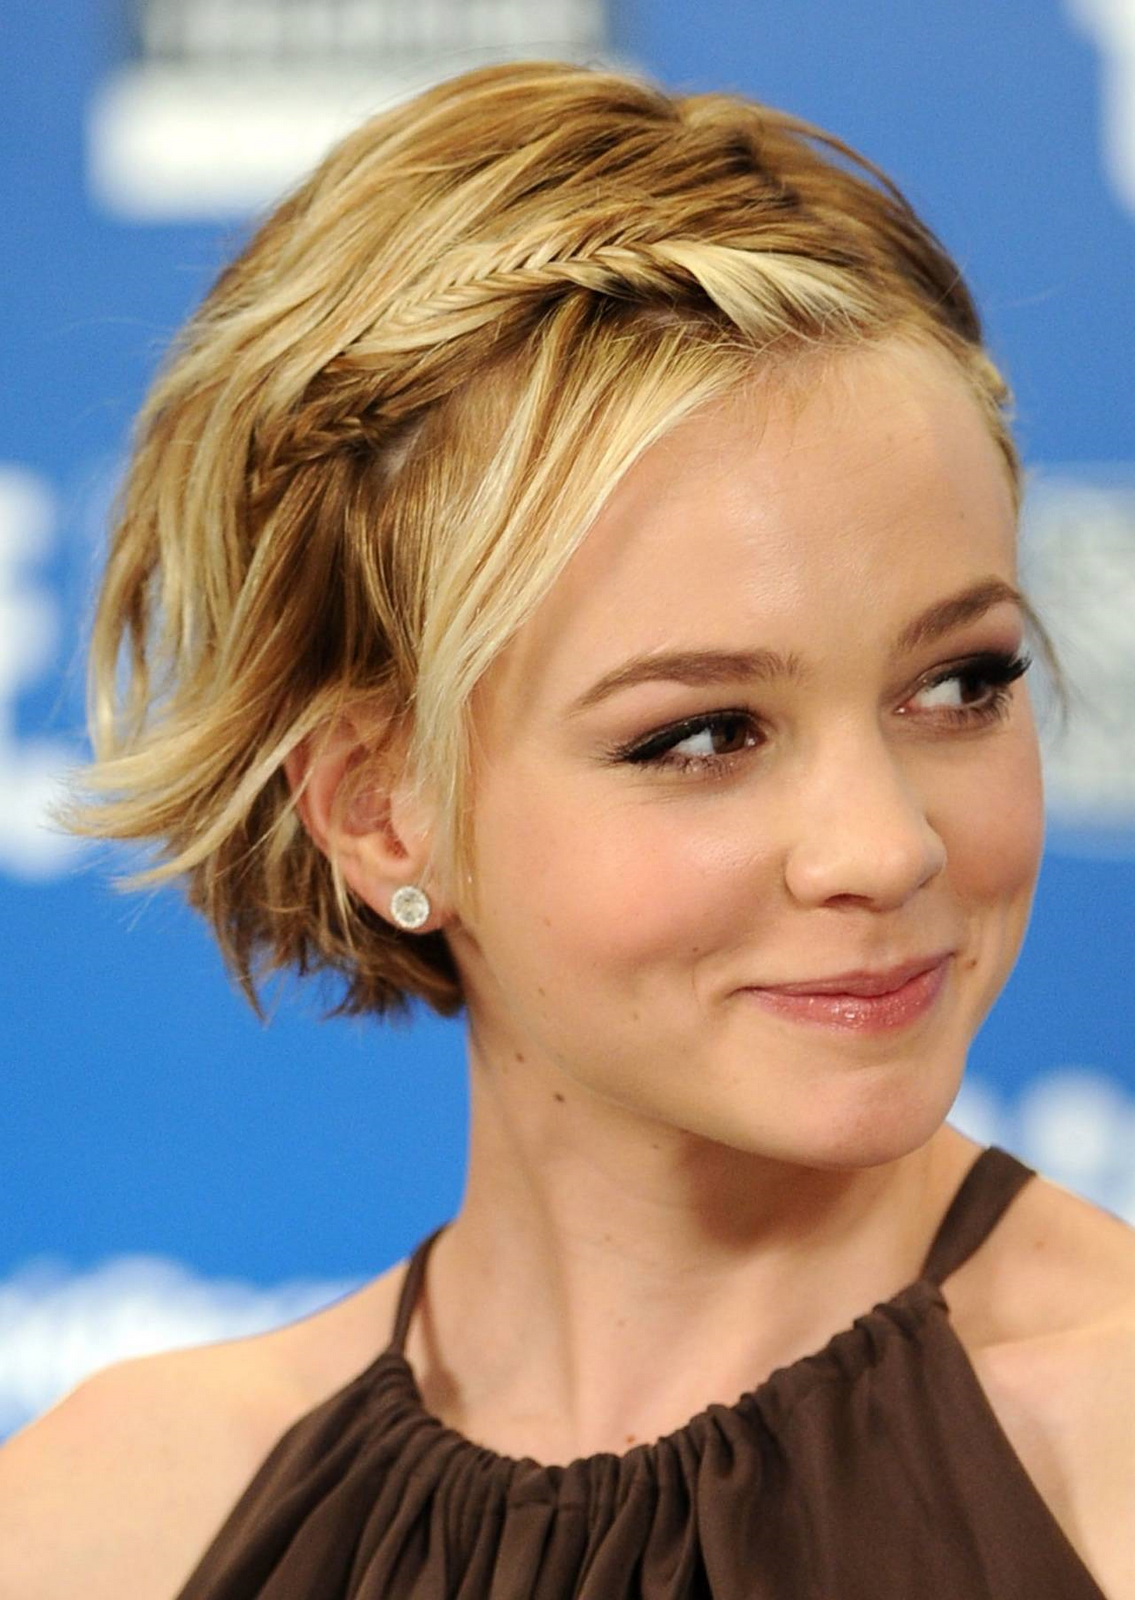 prom short hairstyle on makeup ideas - hairstyles: prom